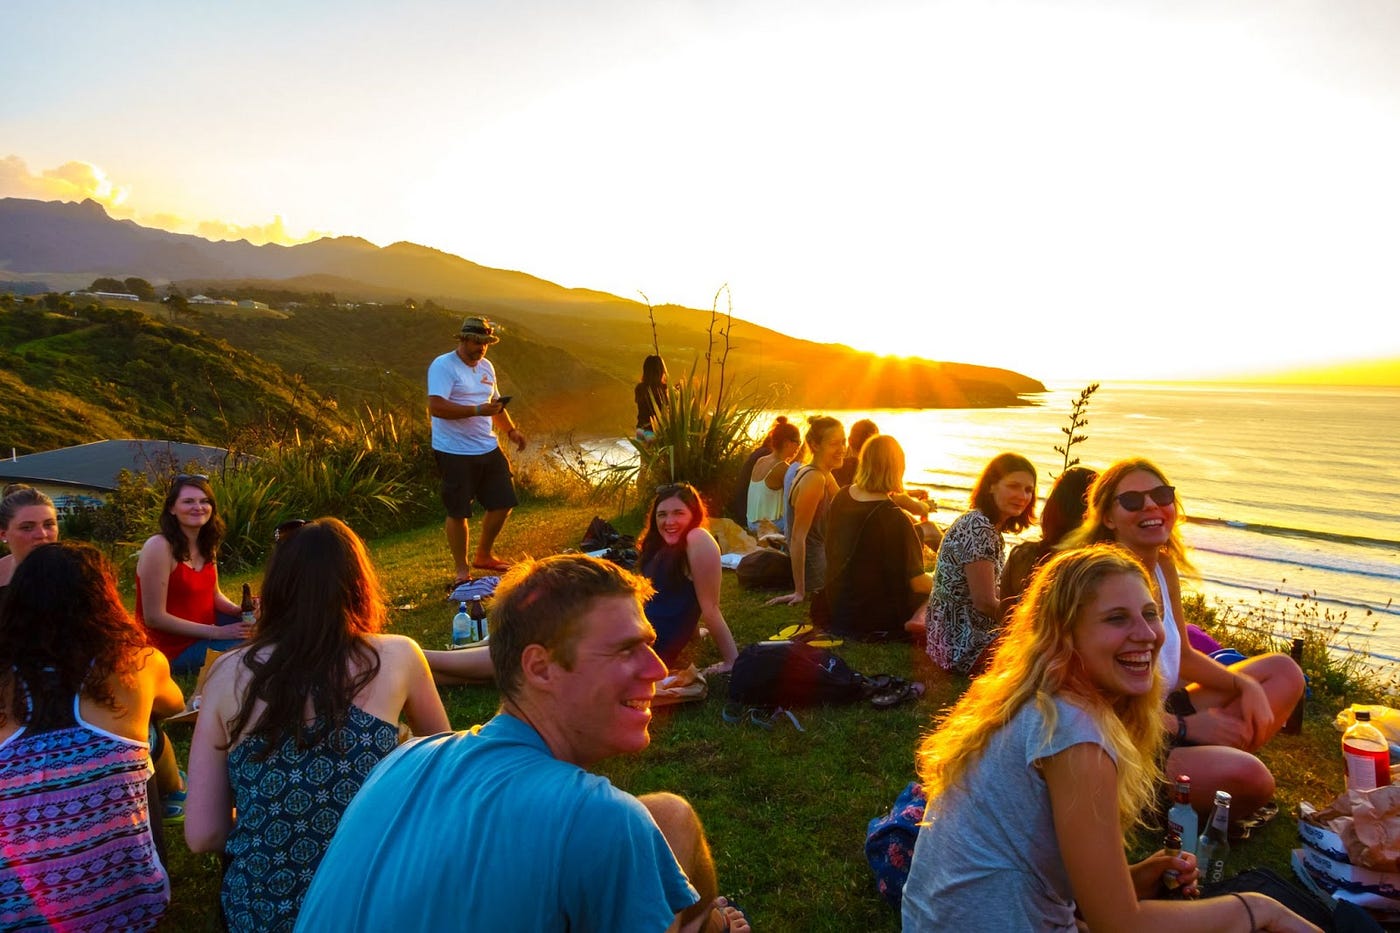 Digital Nomad reveals the reasons why people shouldn't live in Portugal -  RFM : PortugalExpats